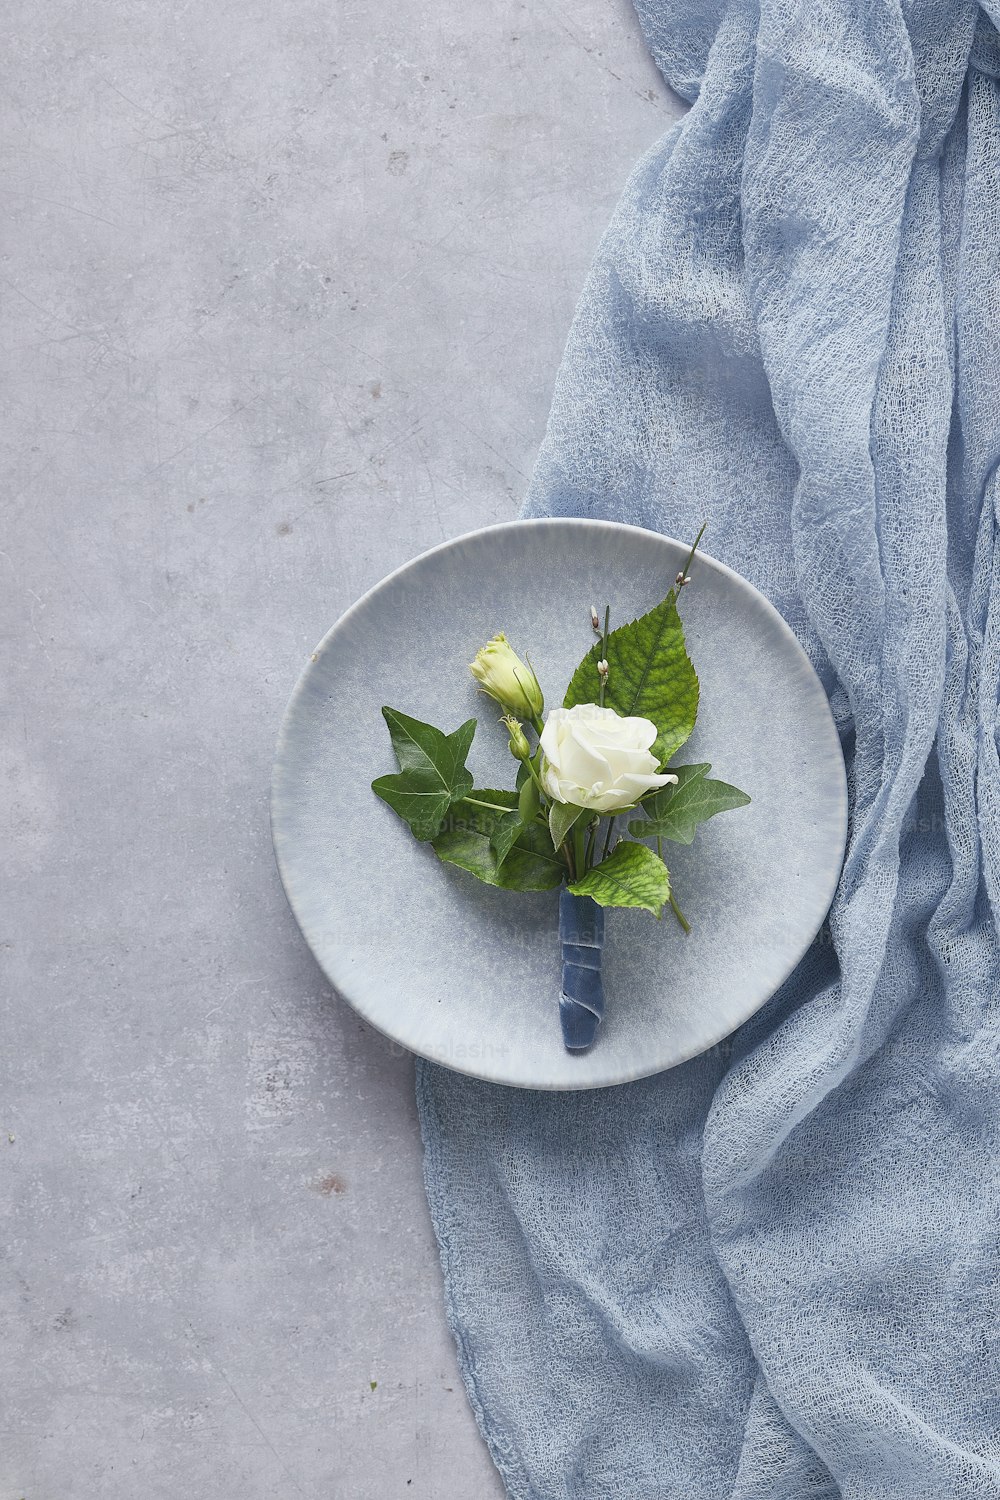 a white rose on a plate on a blue cloth